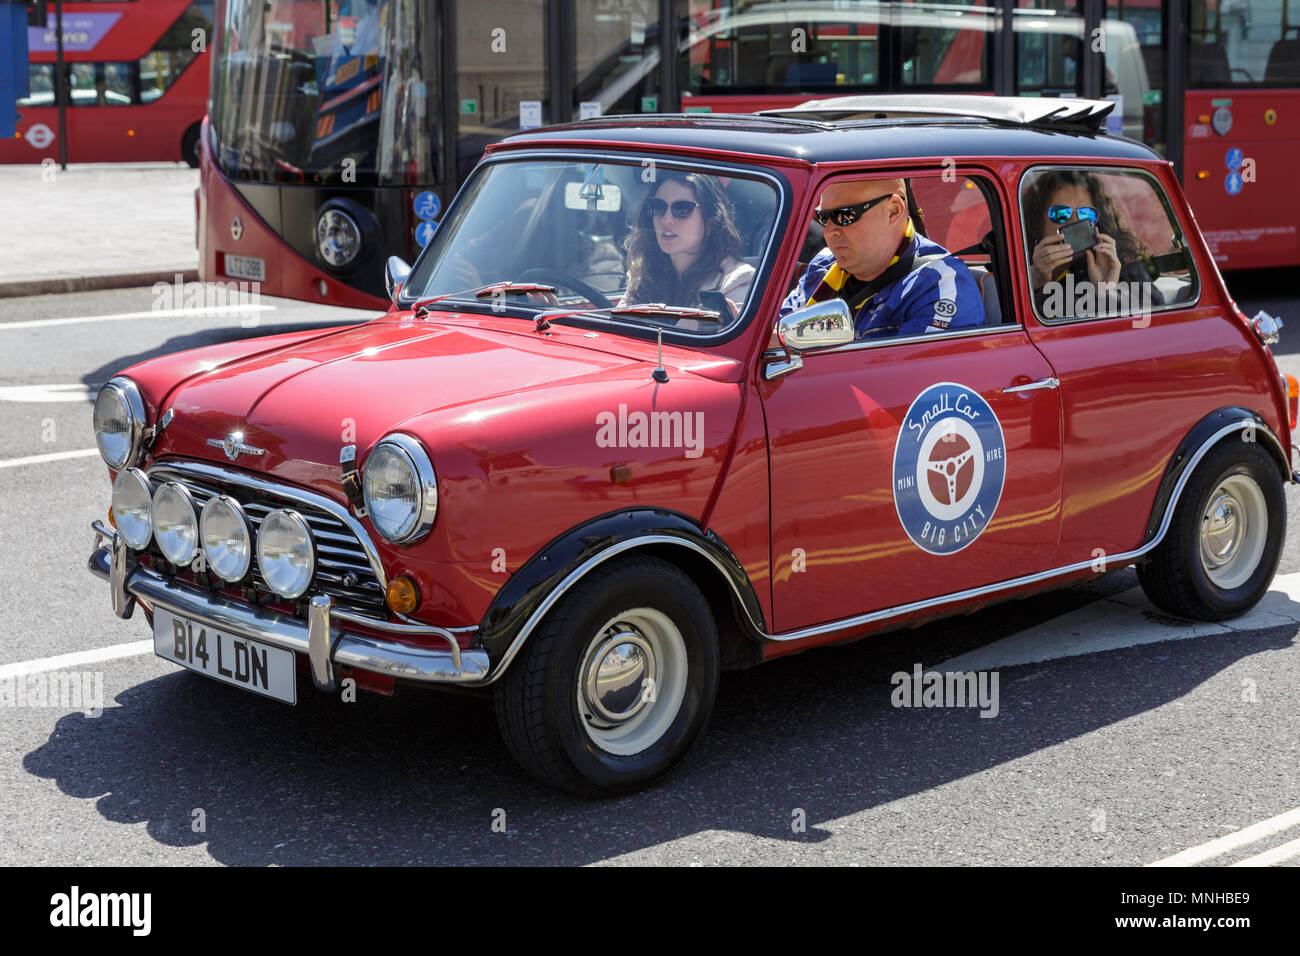 London, 17th May 2018. A red Mini gleams in the sunshine on Trafalgar Square.Around London, tourists and Londoners enjoy a beautifully sunny and warm day in the capital. Credit: Imageplotter News and Sports/Alamy Live News Stock Photo